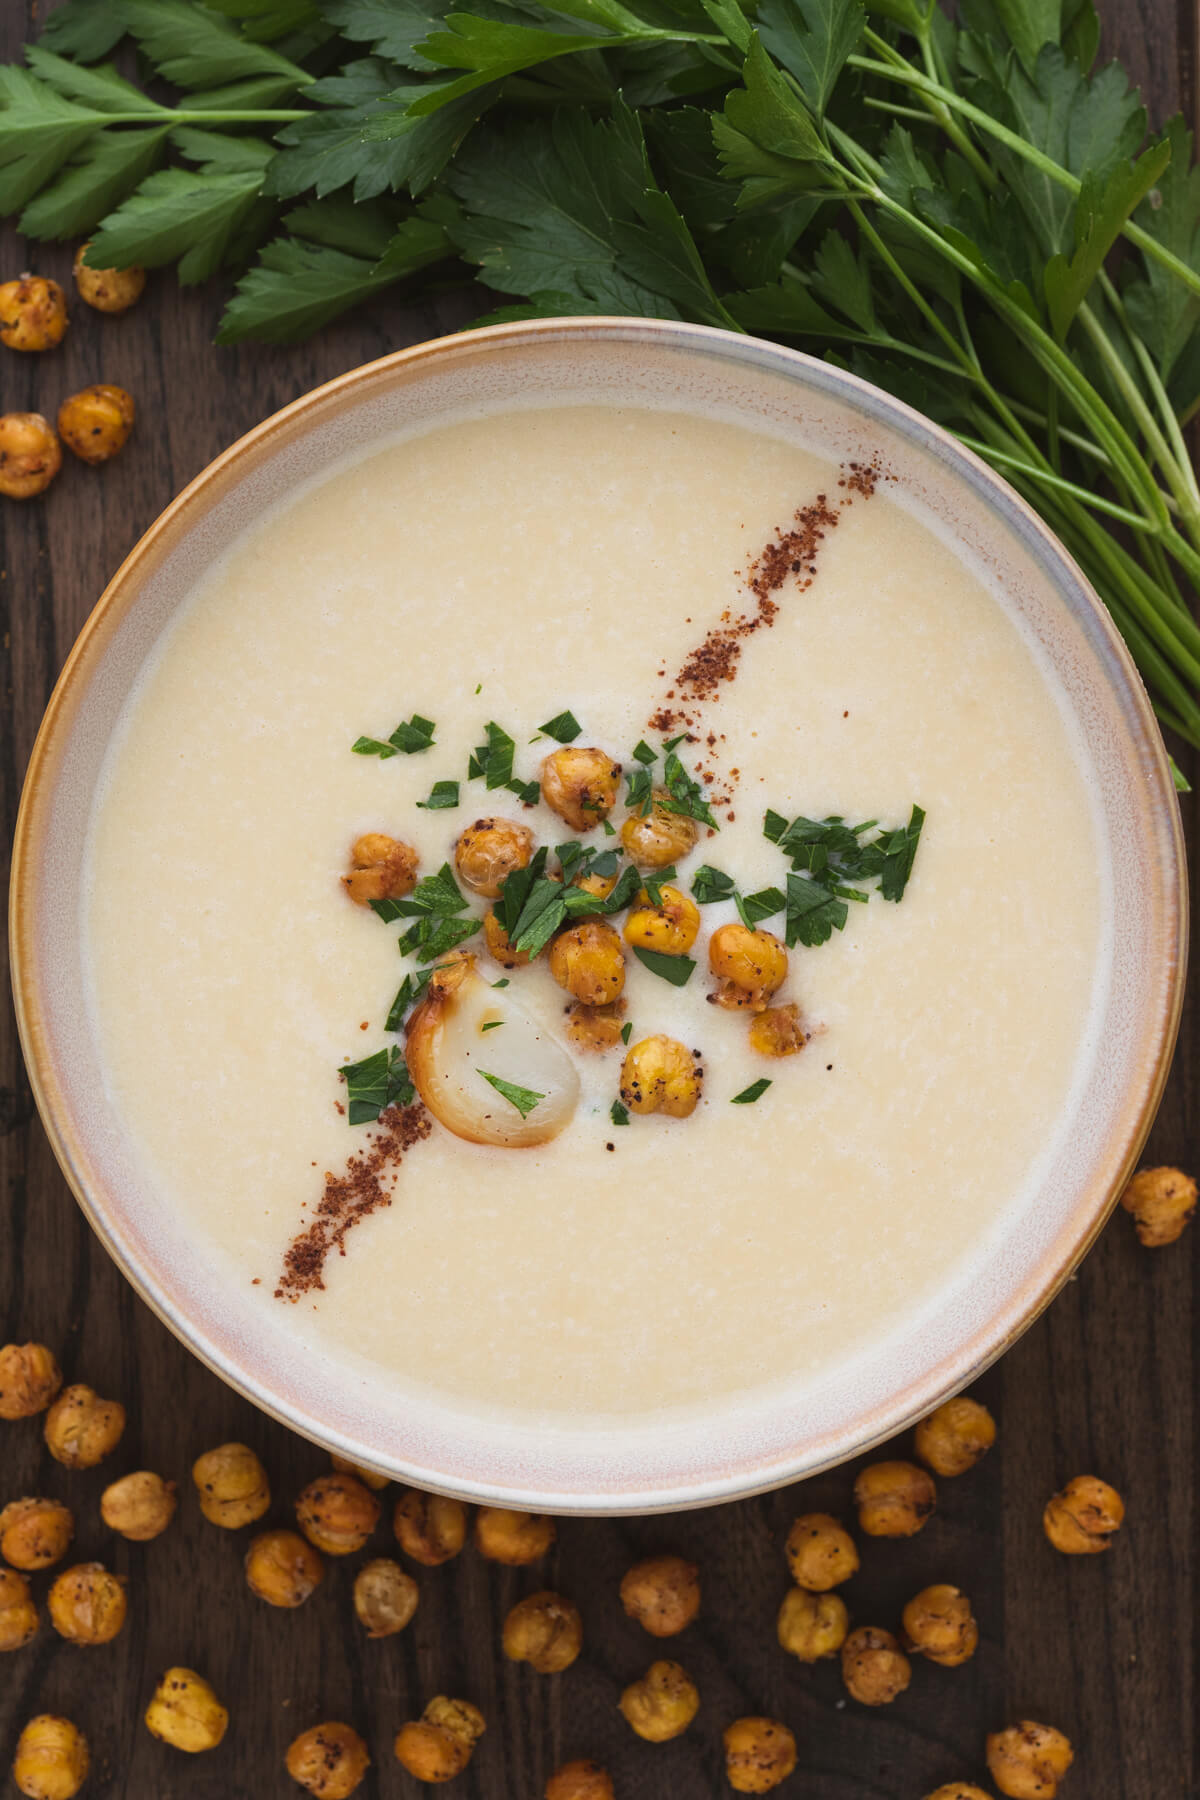 A bowl of creamy Chickpea Soup garnished with sumac, roasted garlic, crispy chickpeas, and parsley.